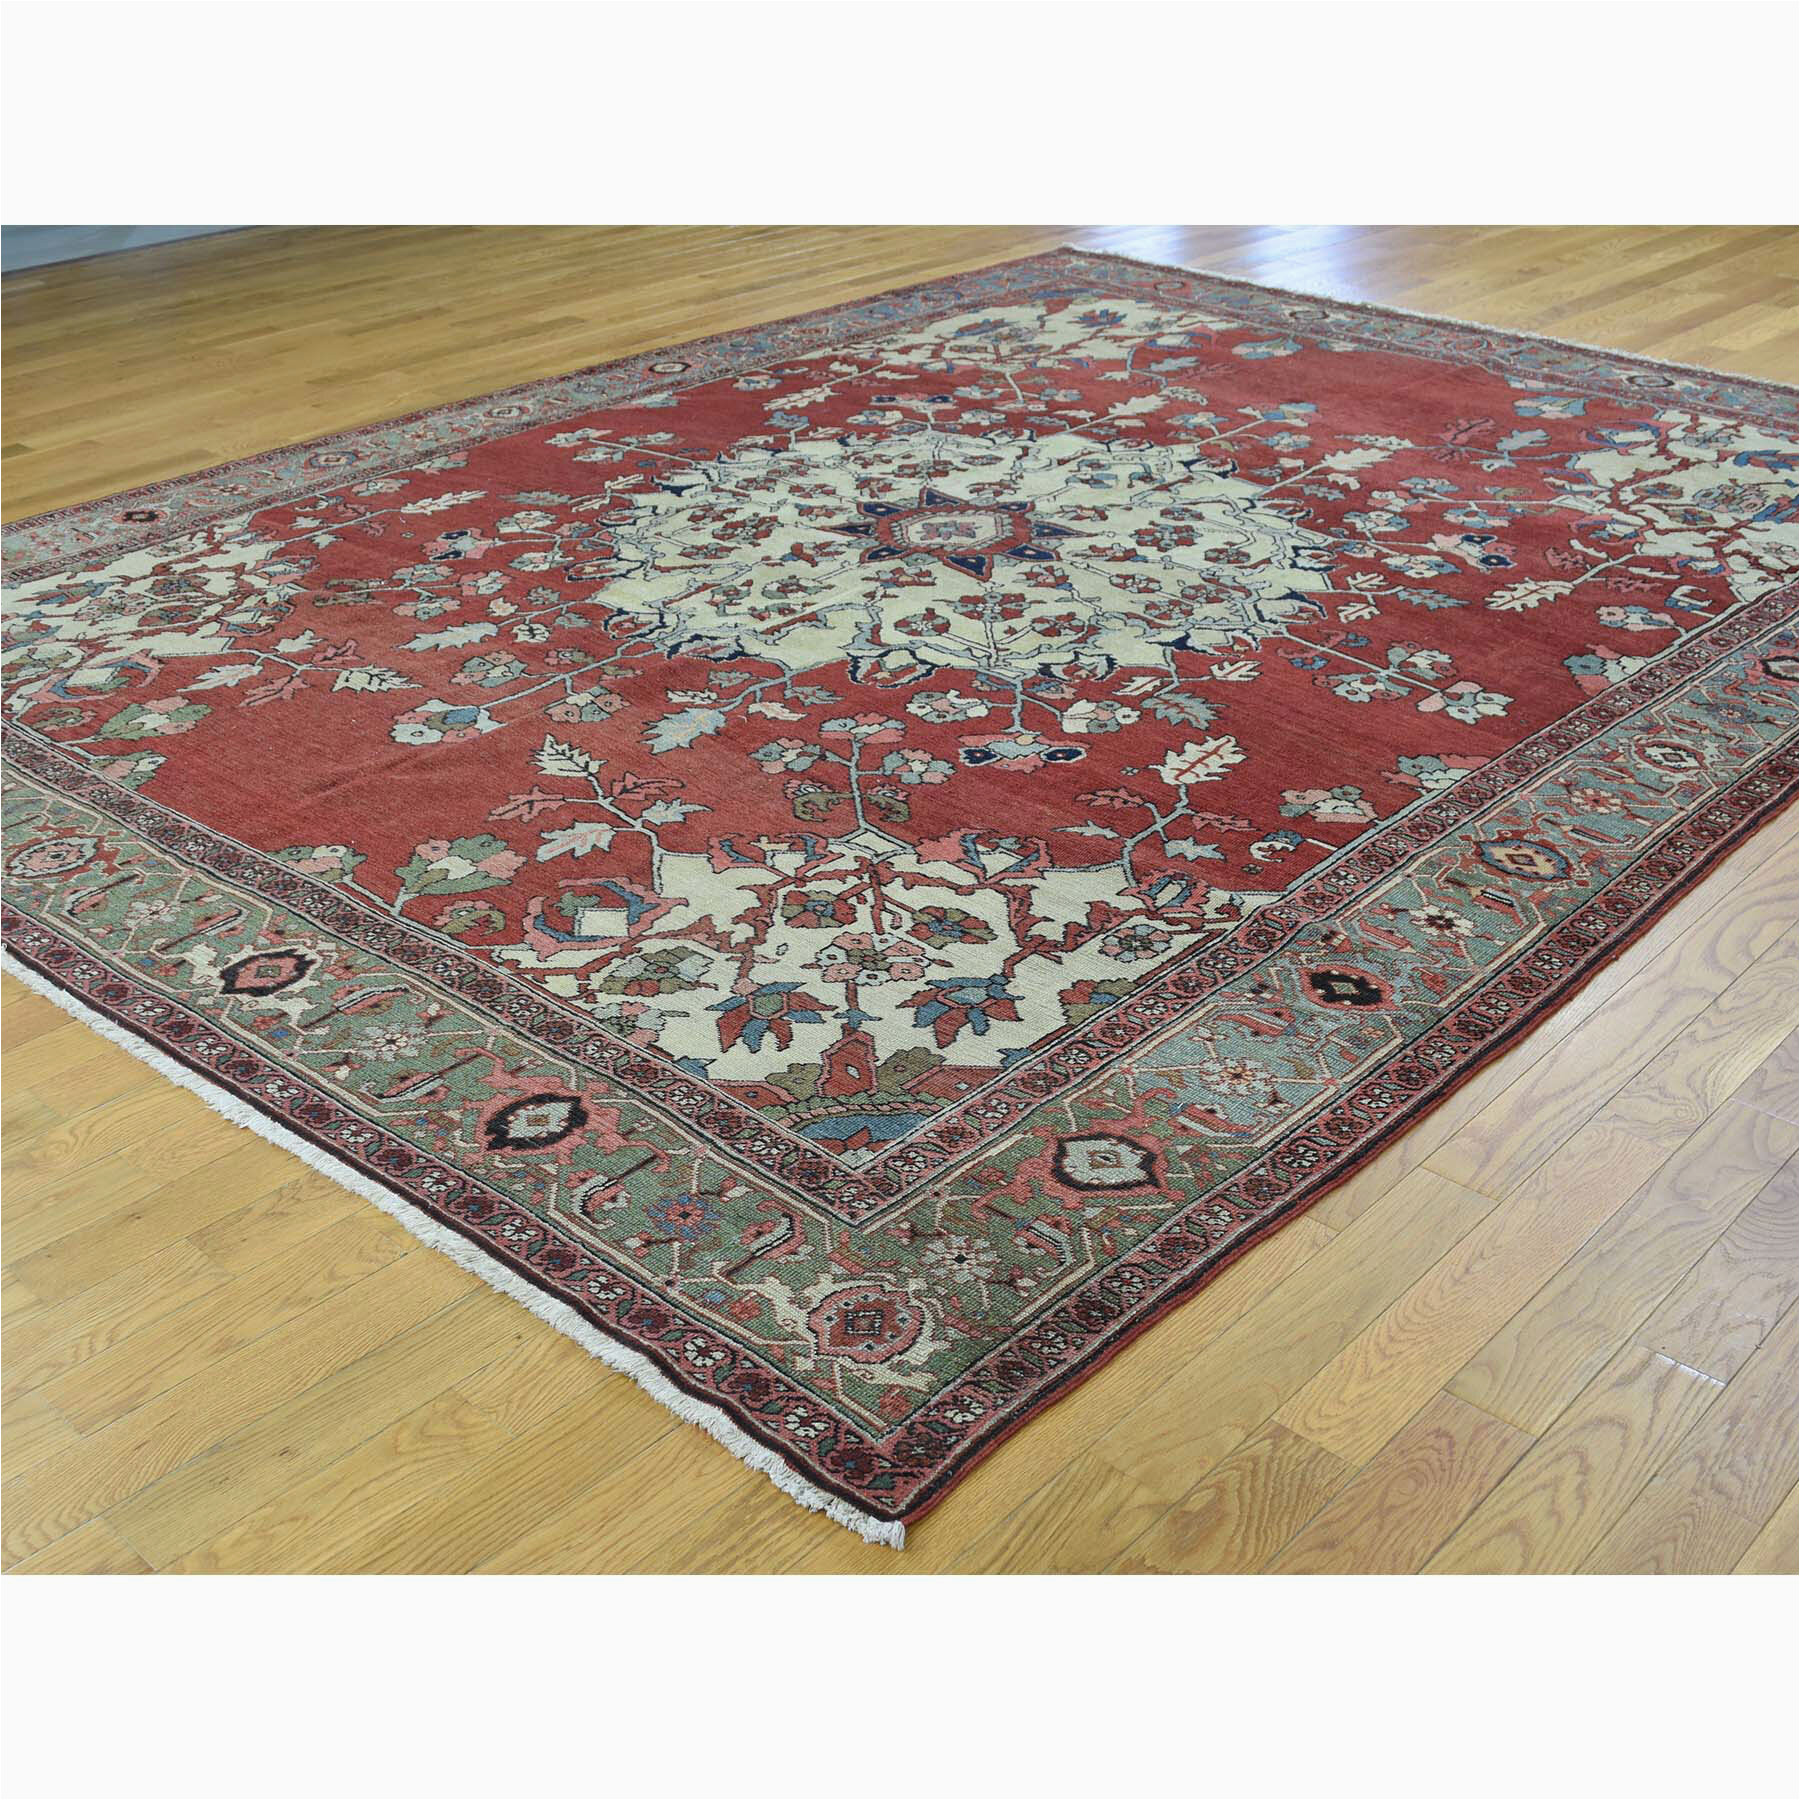 9 X 11 Wool area Rugs One-of-a-kind Ken Hand-knotted 9′ X 11’3″ Wool area Rug In Red/ivory/green